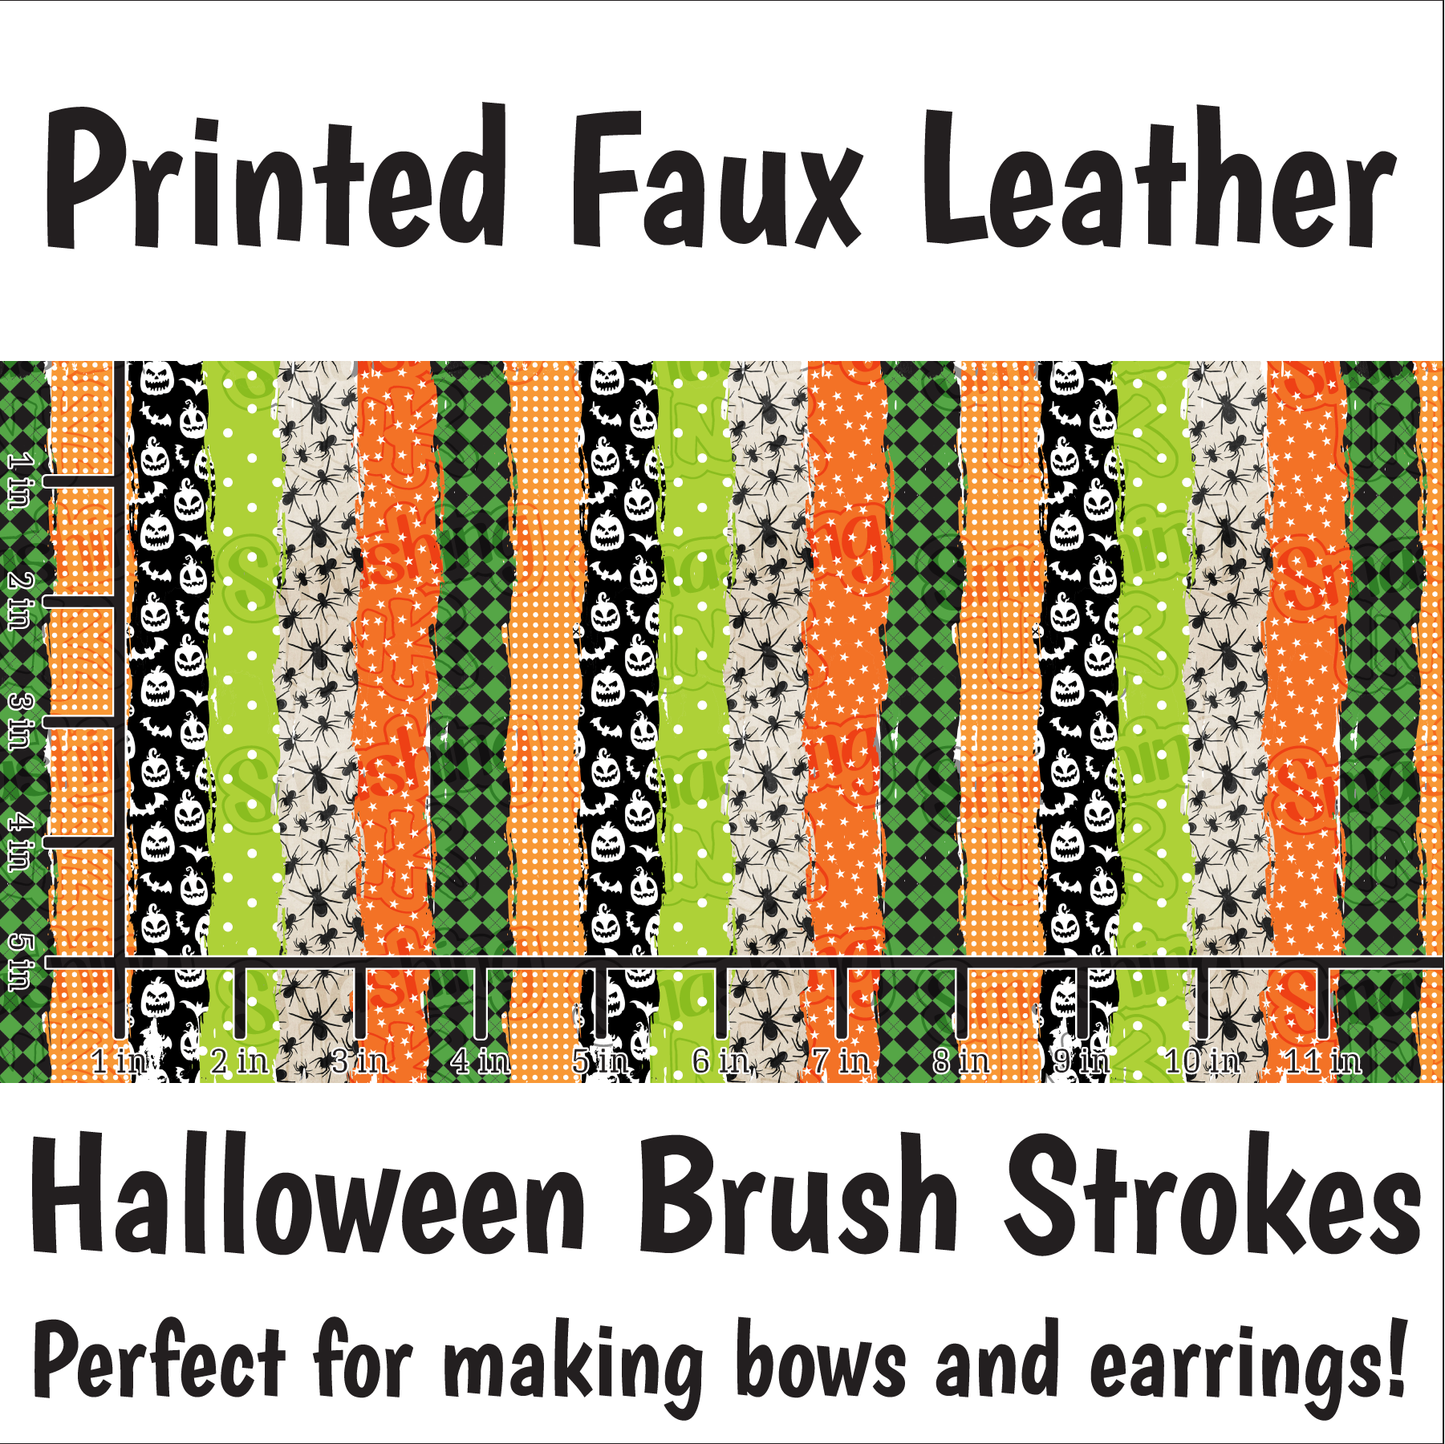 Halloween Brush Strokes - Faux Leather Sheet (SHIPS IN 3 BUS DAYS)